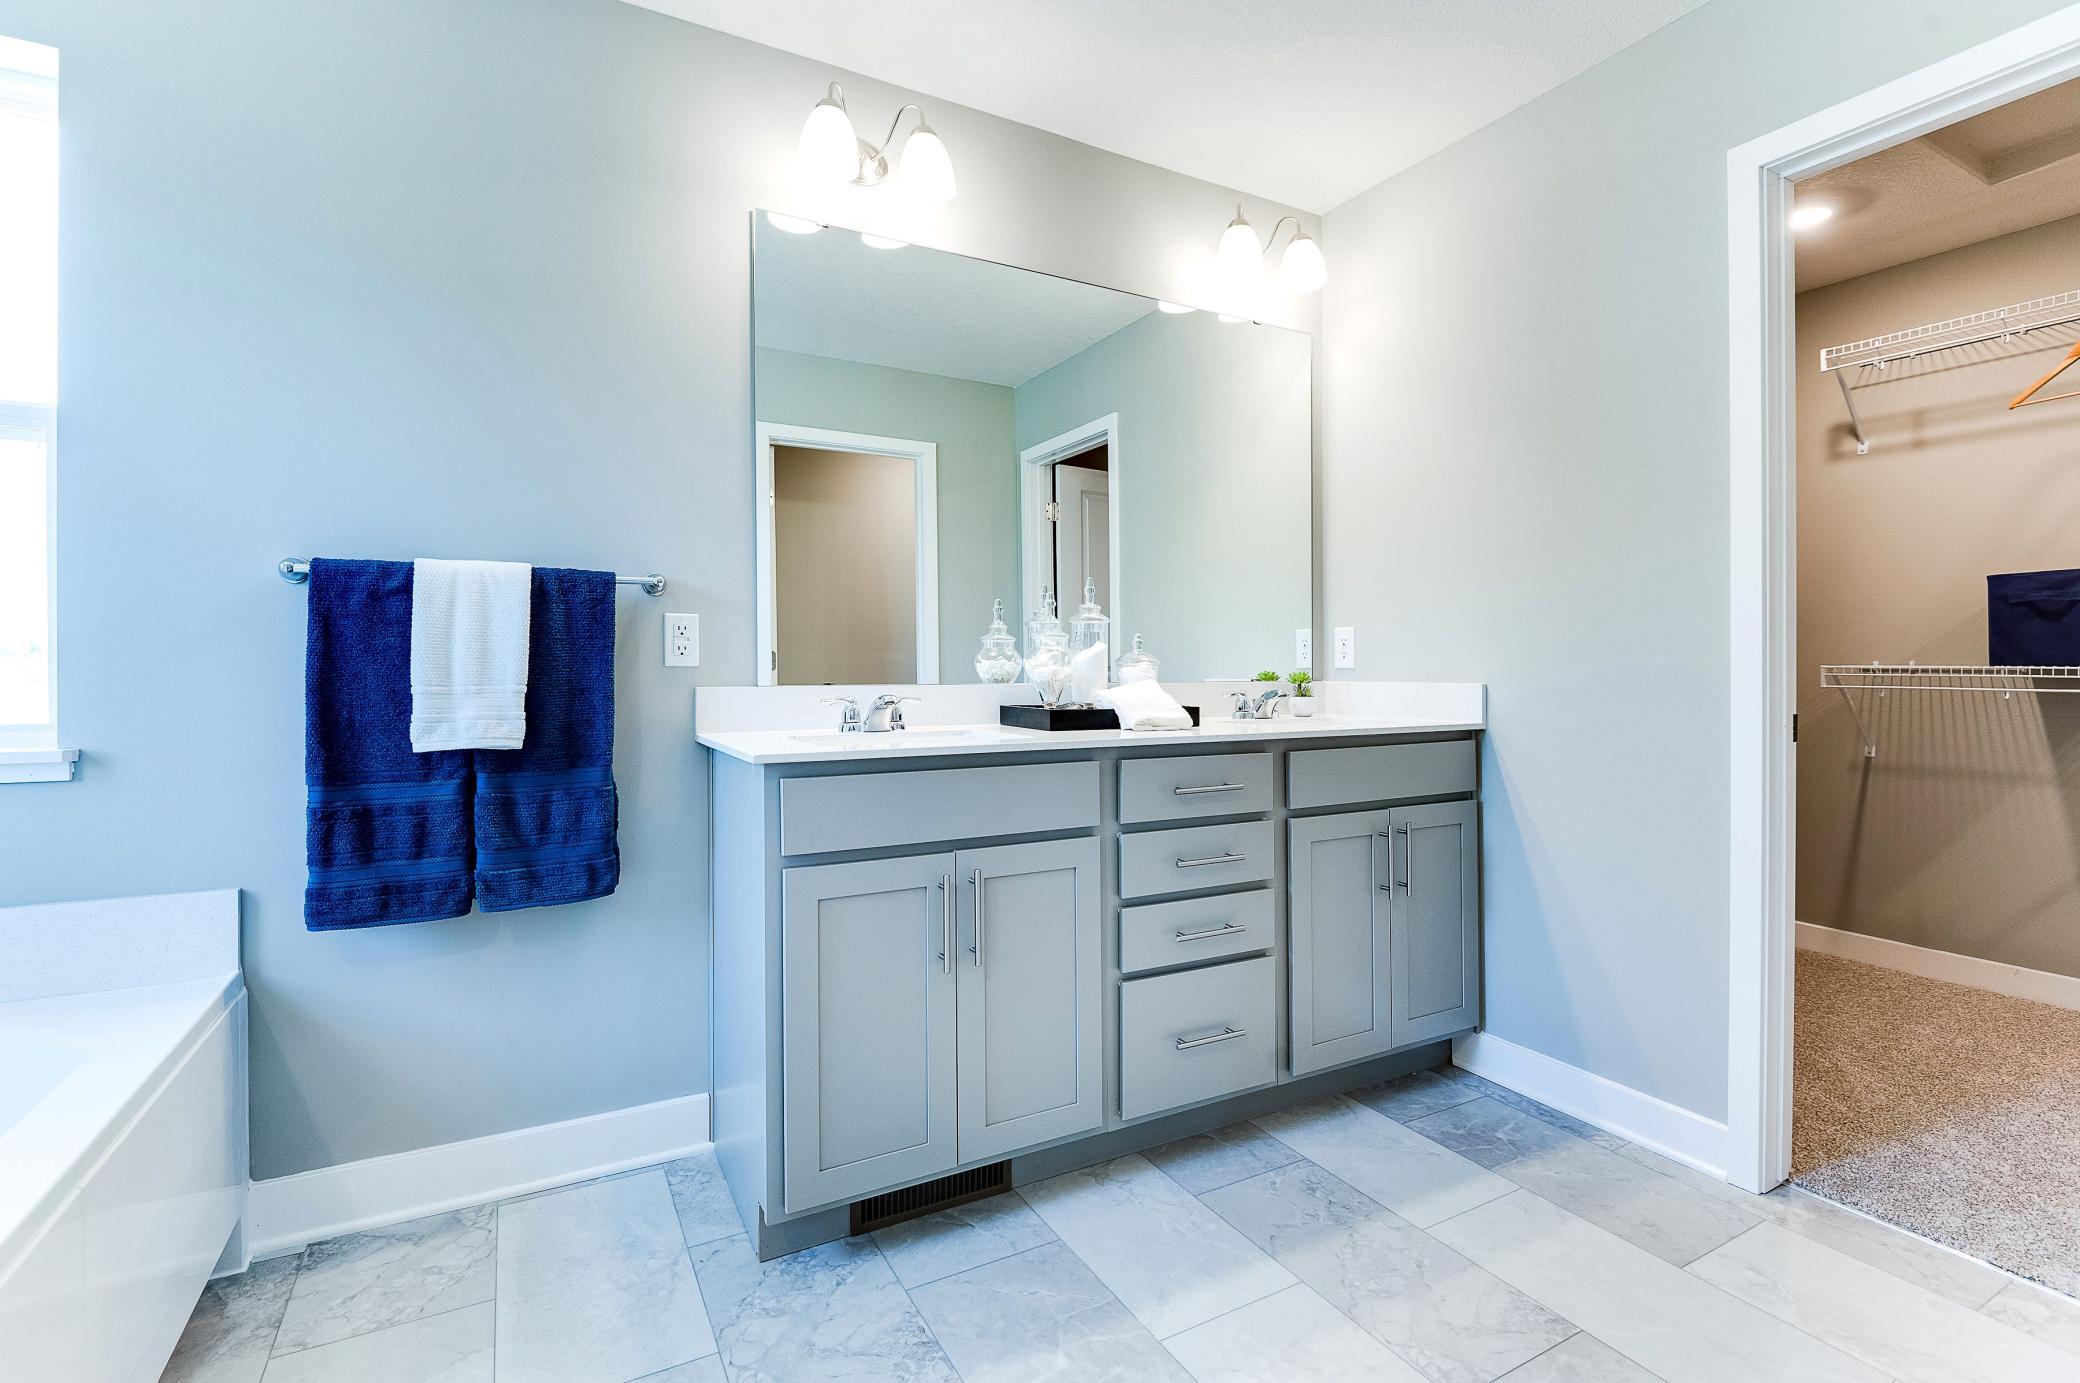 An extension of the primary suite, this private and spacious bathroom contains a double-vanity, an oversized stand-in shower, soaking tub, private stool room and access to a HUGE walk-in closet!! Photo of model home, color and options will vary.